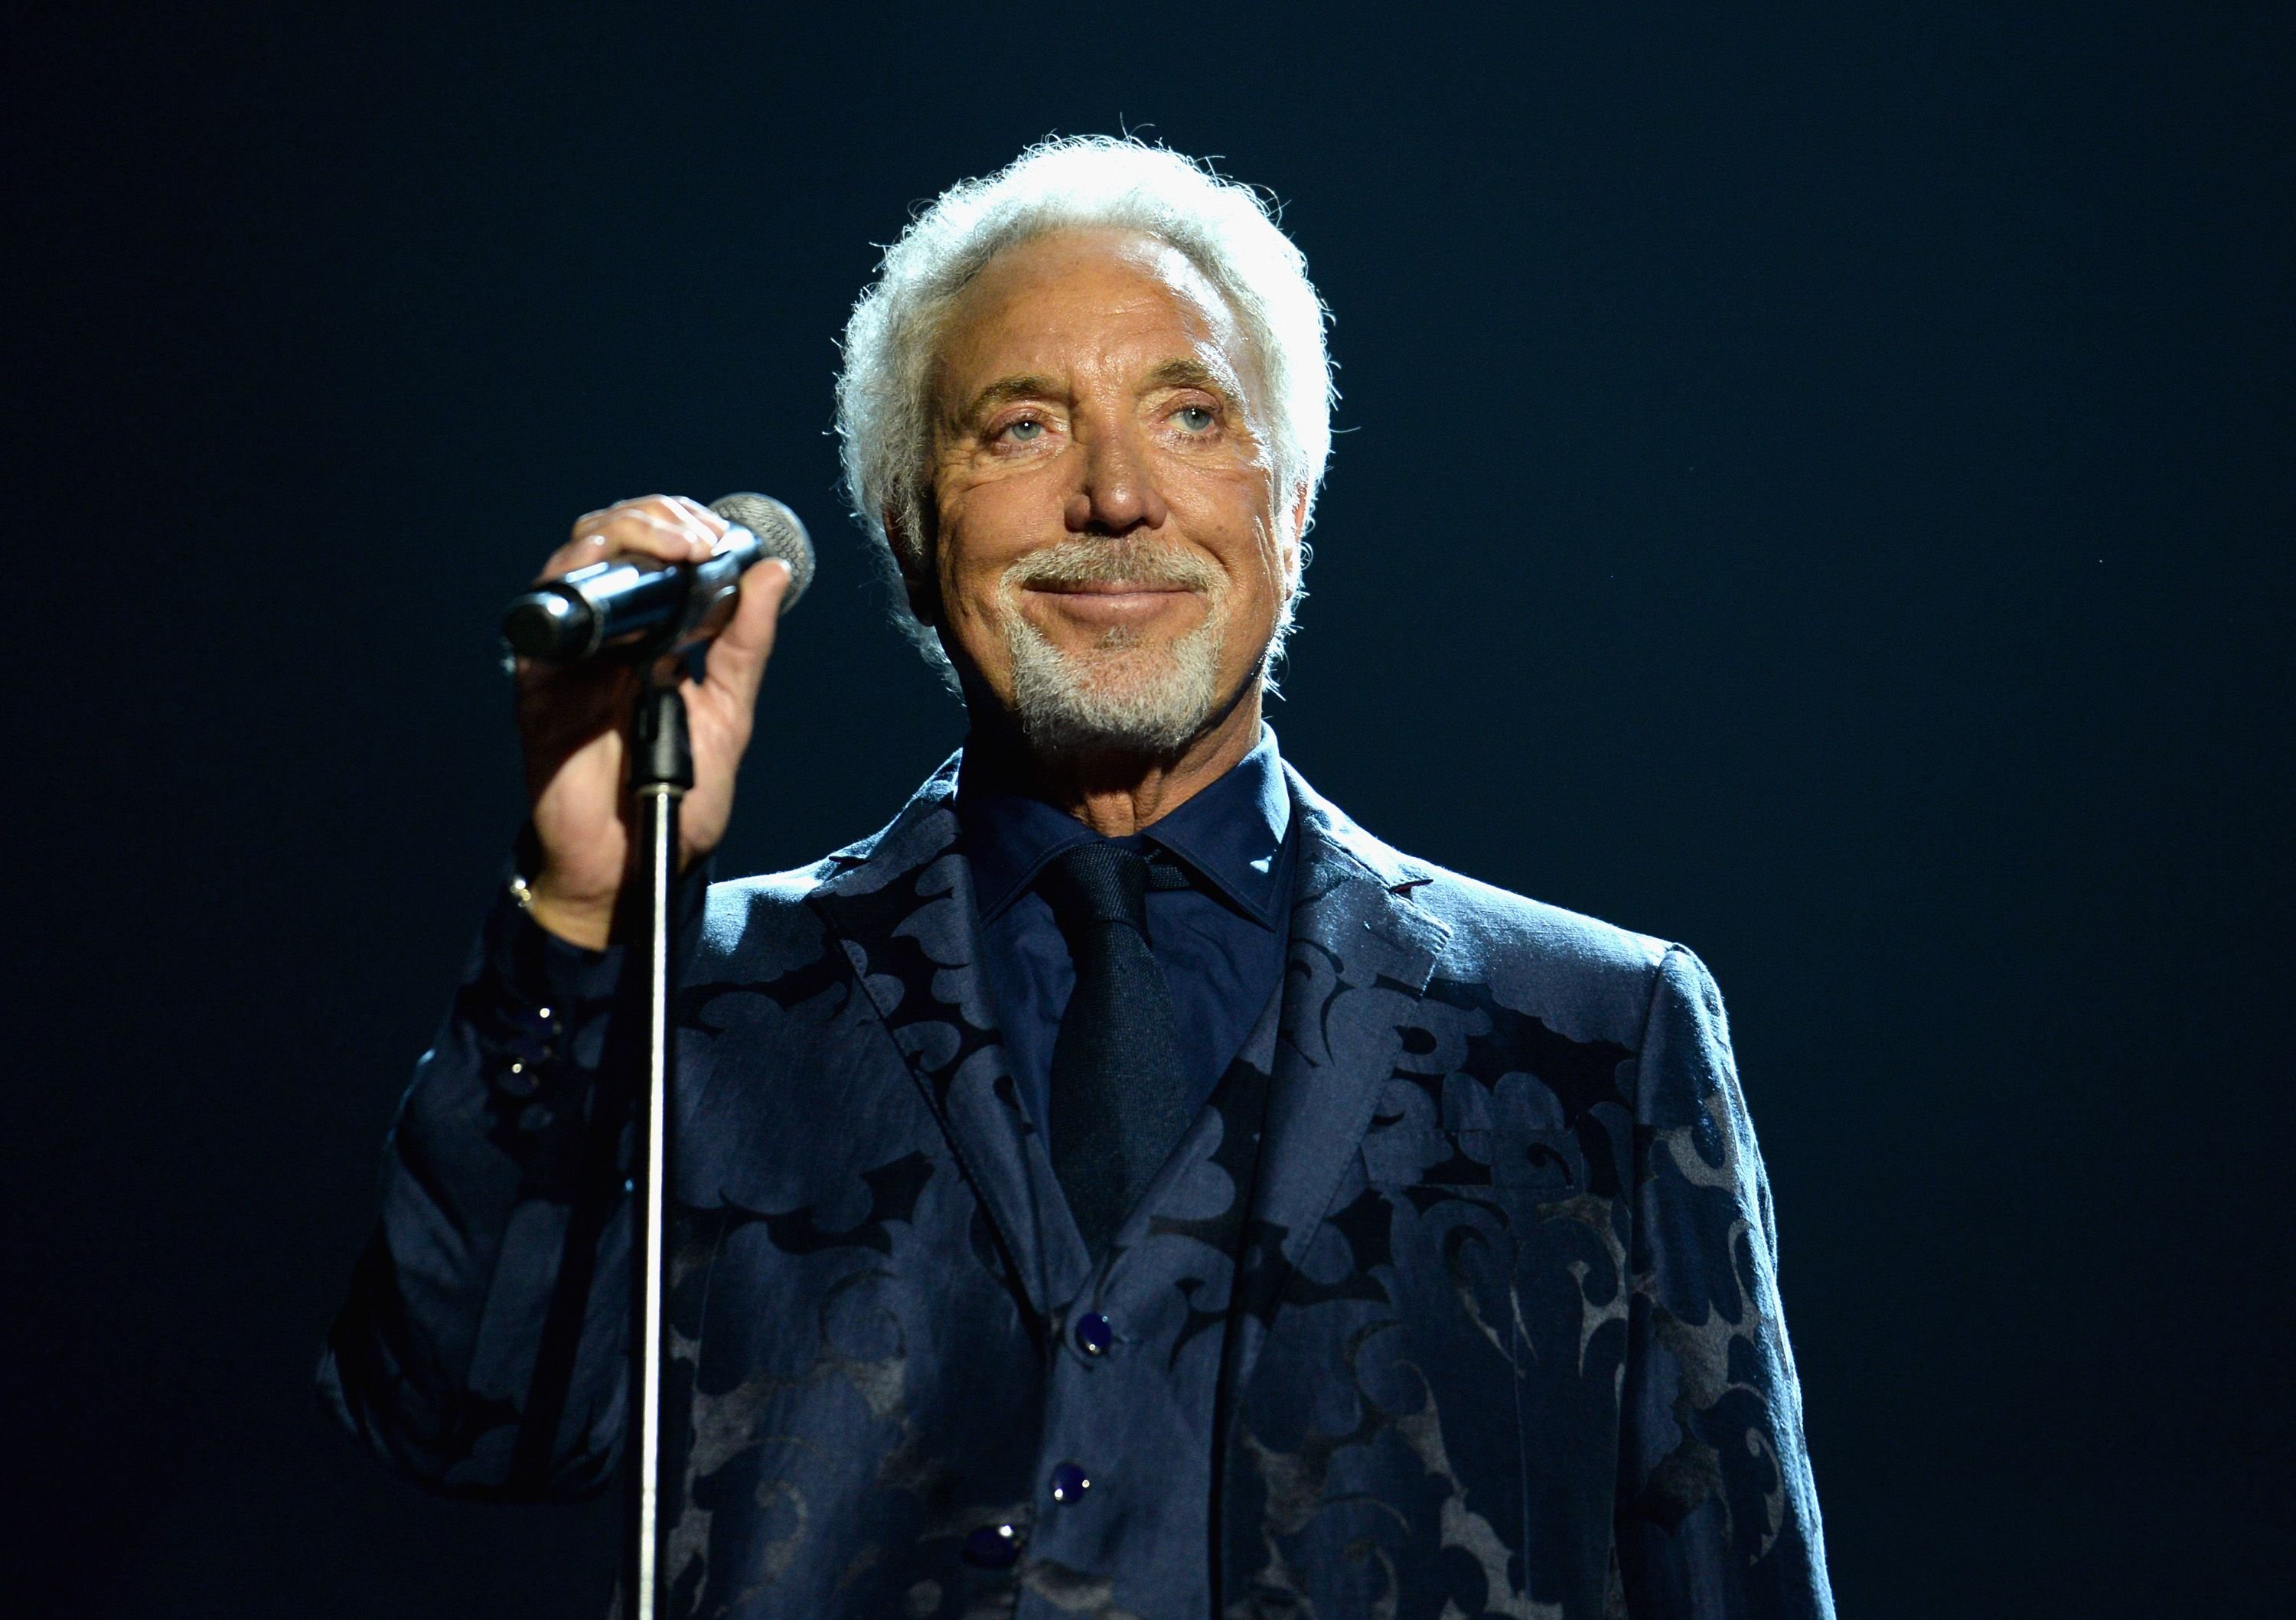 Tom Jones during the 25th anniversary MusiCares 2015 Person Of The Year Gala honoring Bob Dylan at the Los Angeles Convention Center on February 6, 2015 in Los Angeles, California. | Source: Getty Images